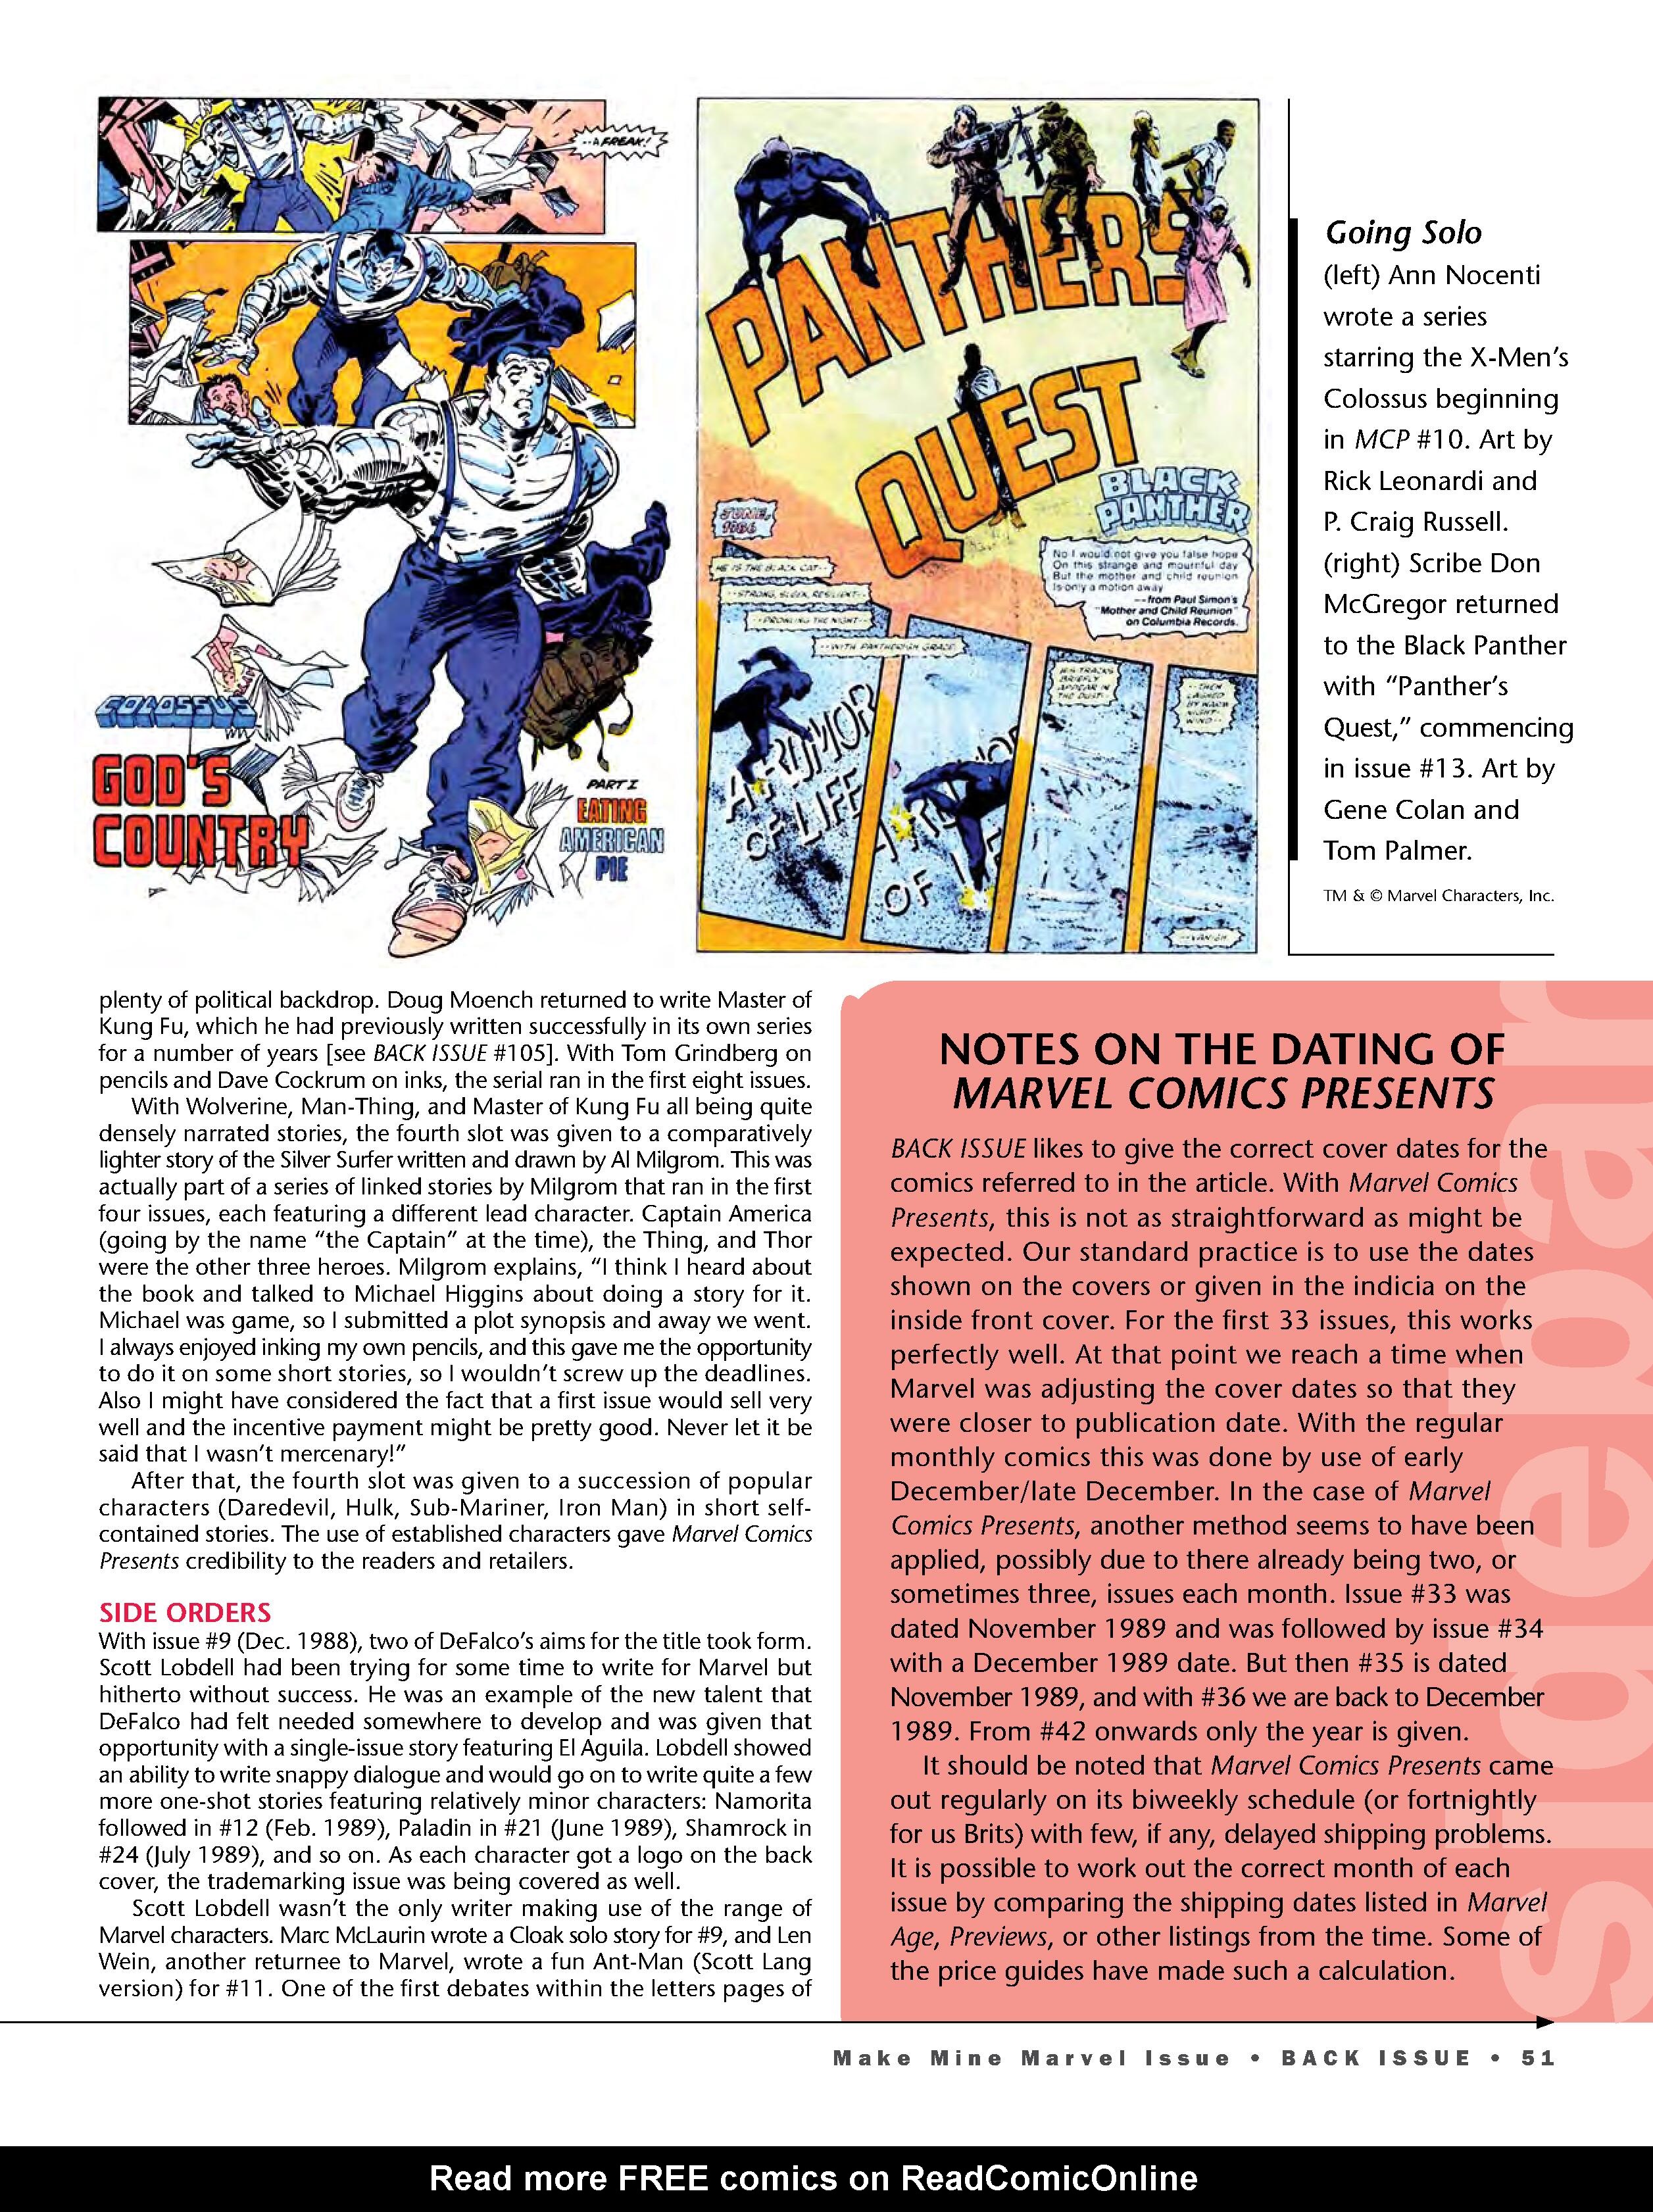 Read online Back Issue comic -  Issue #110 - 53